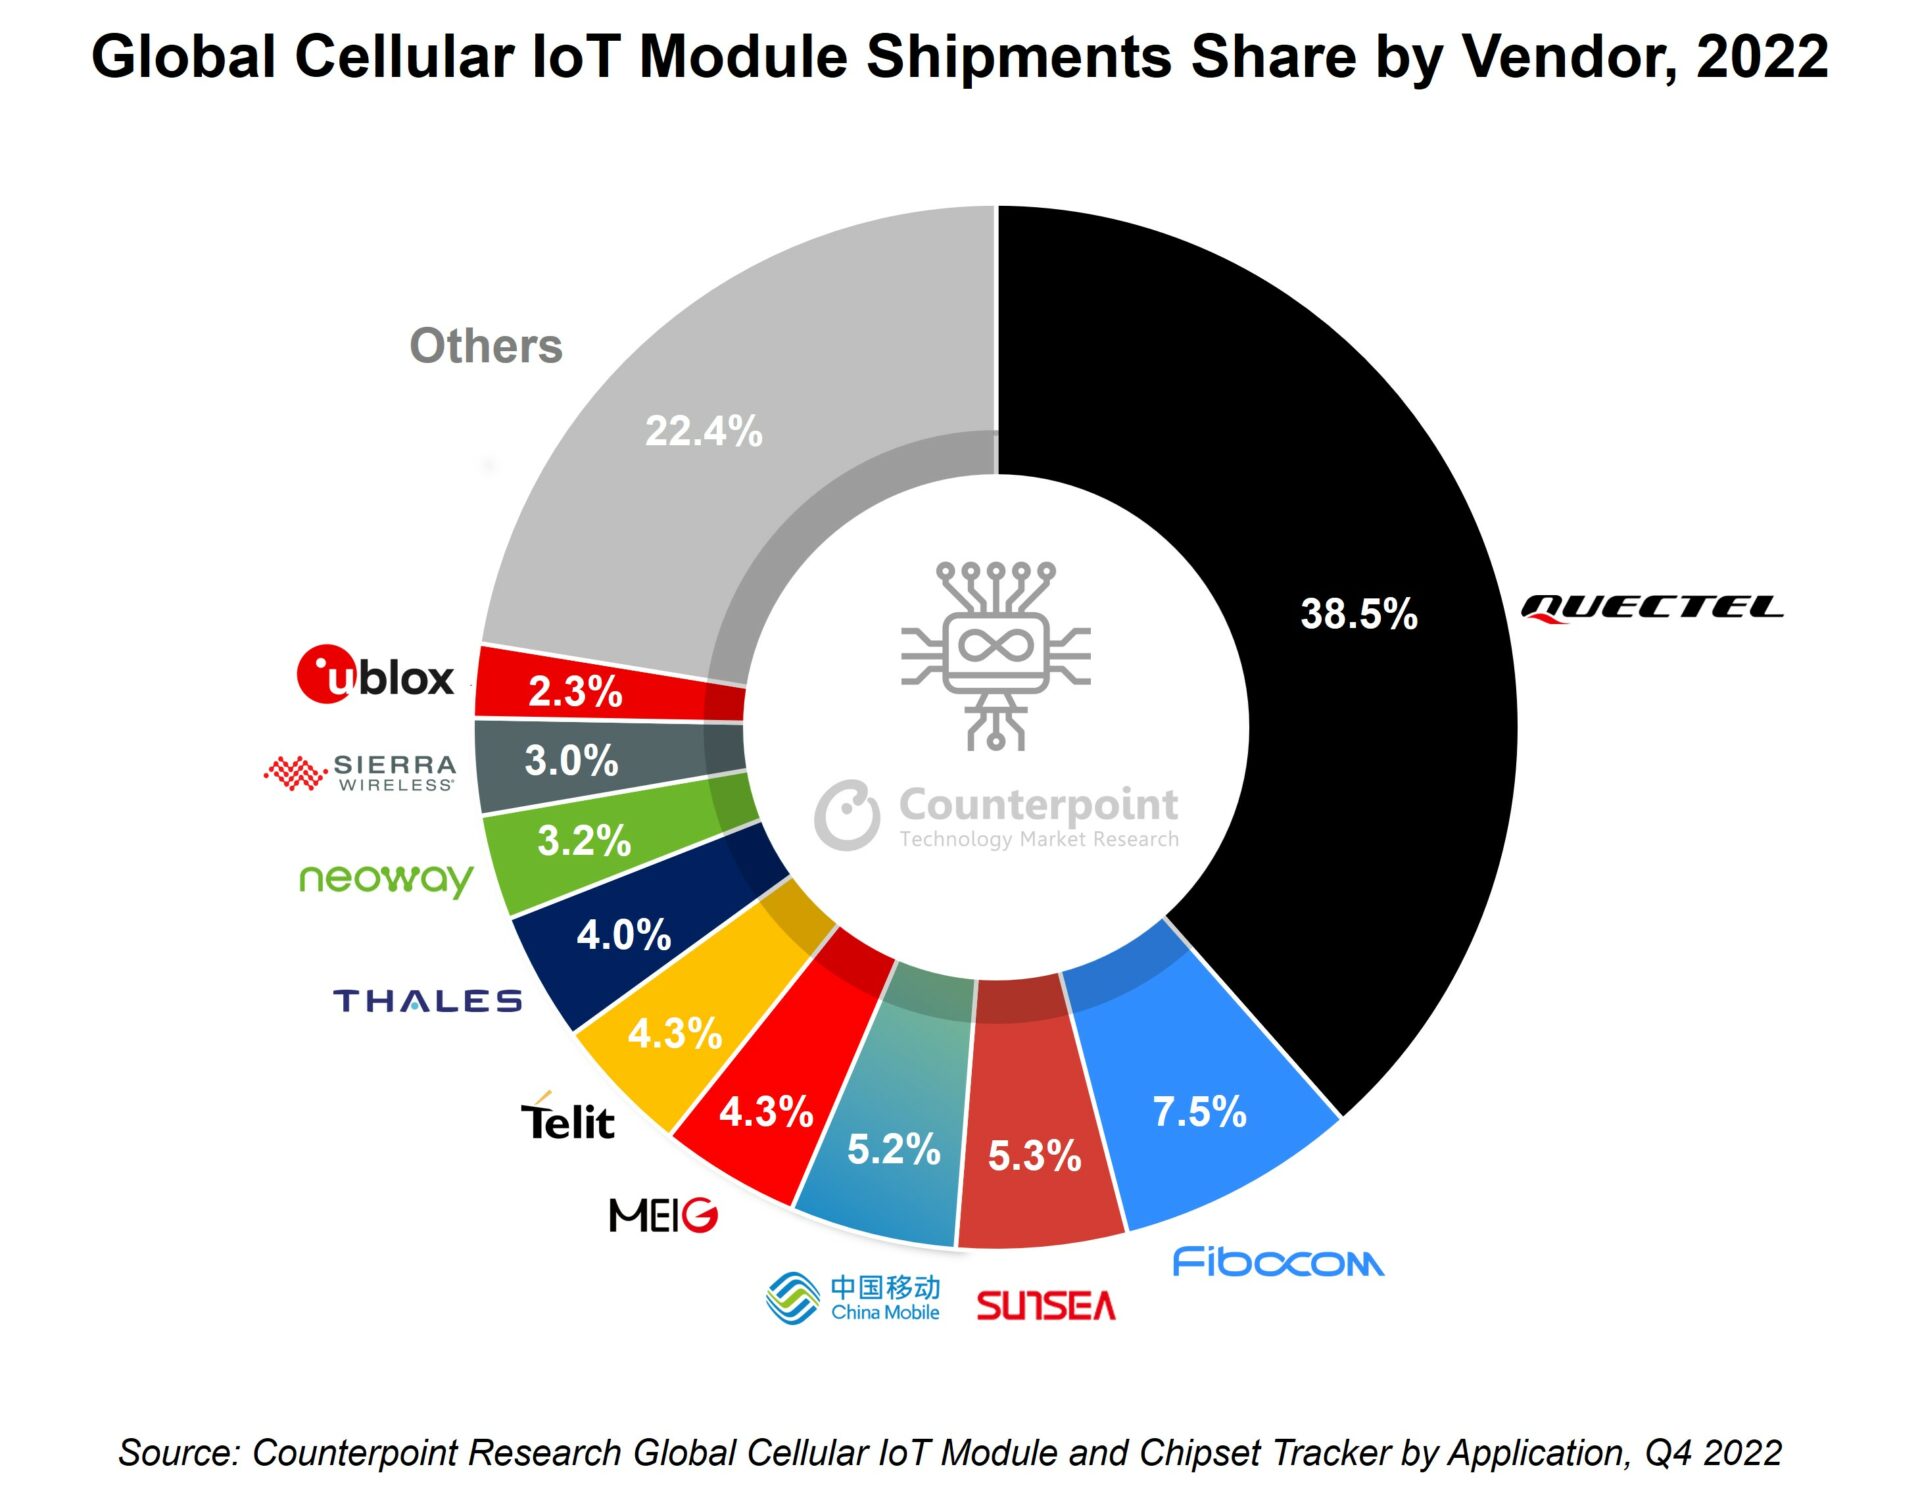 Global IoT market size to grow 19% in 2023